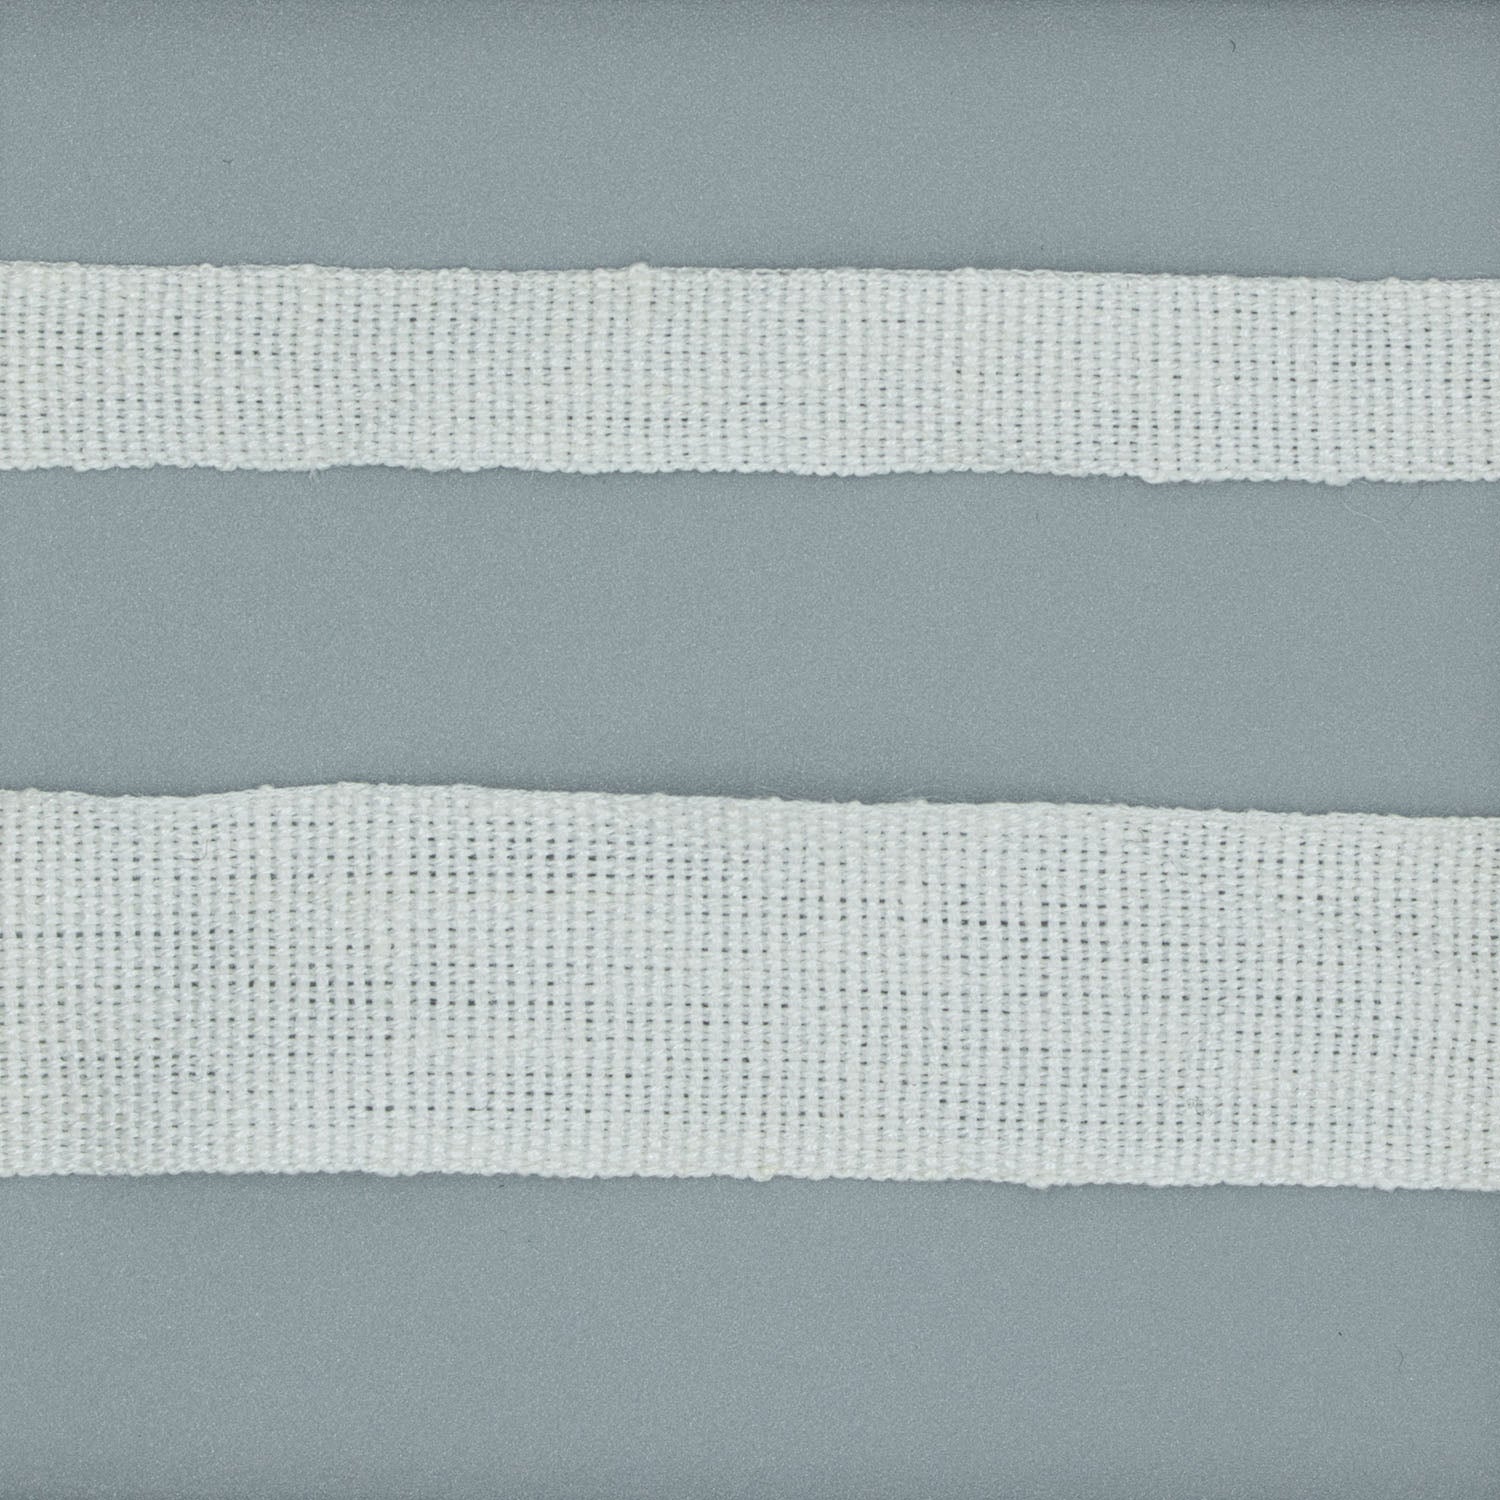 White linen plain weave tape in 3/8 and 3/4 inch